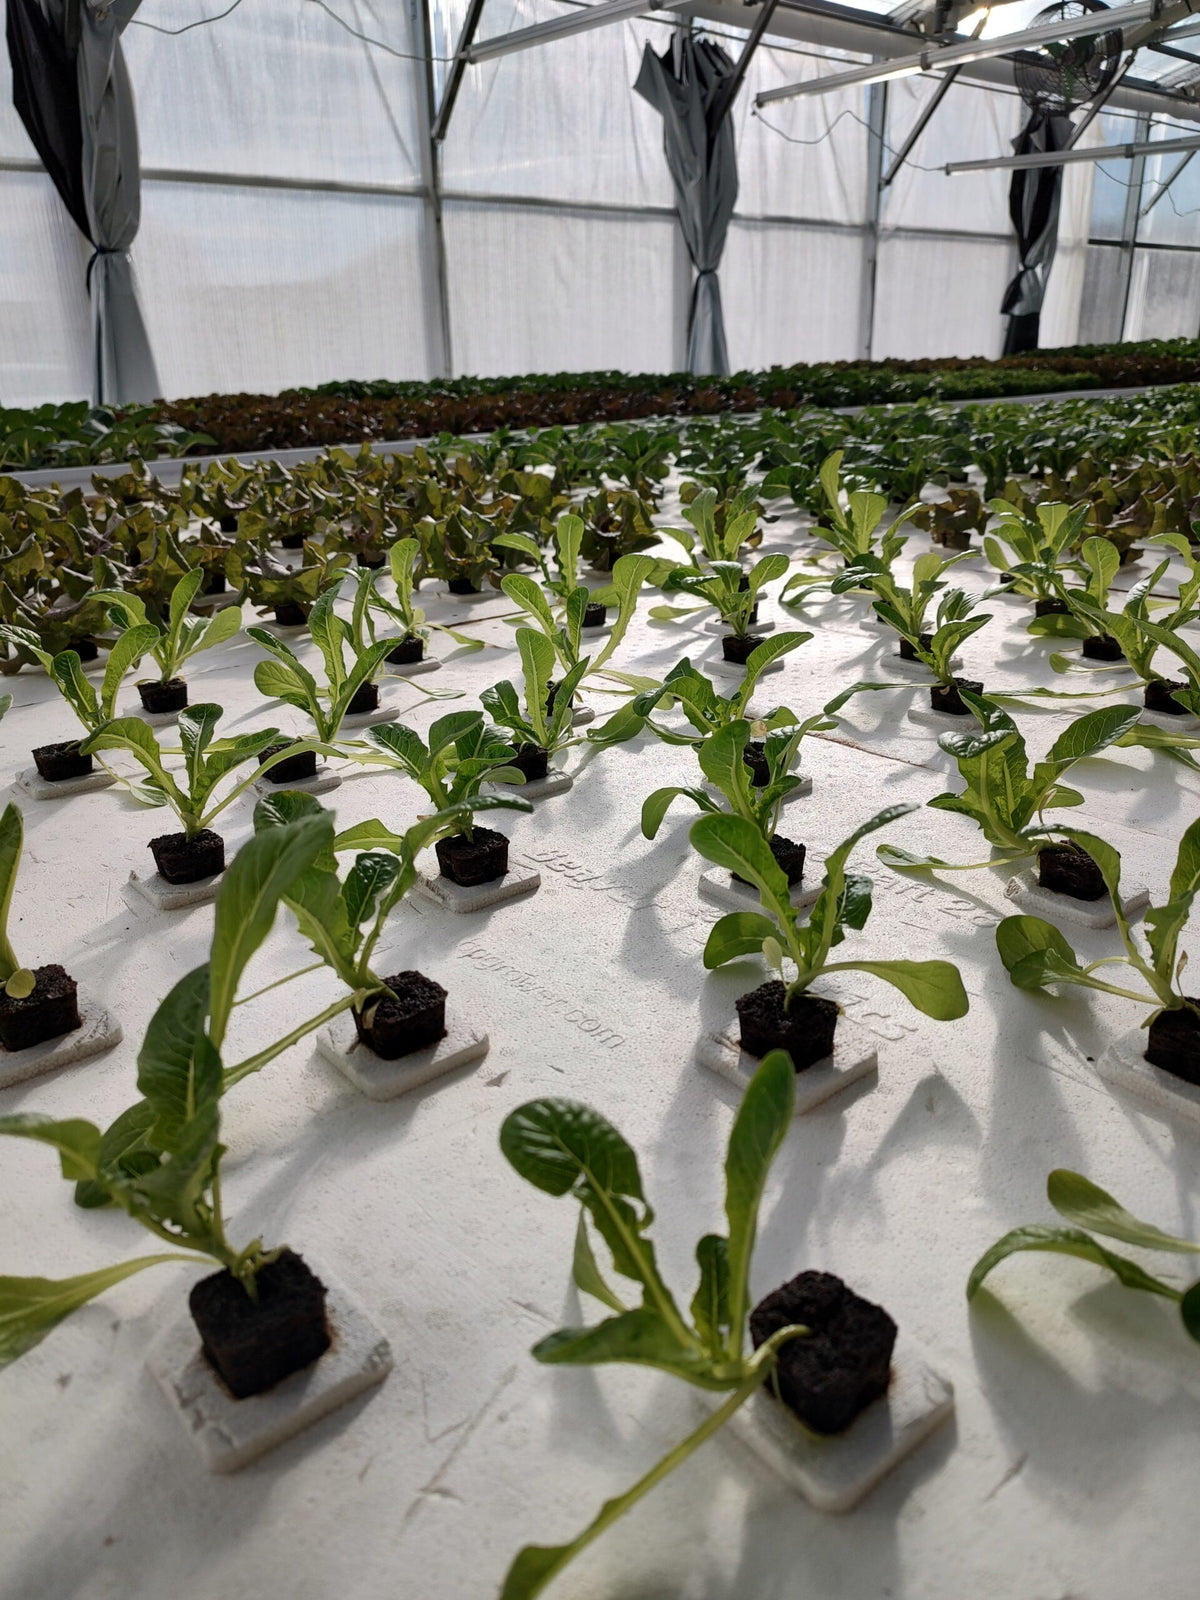 A hydroponic greenhouse with plants growing in deep water culture using Deep Water Culture Raft Boards by Aquaponics For Life.